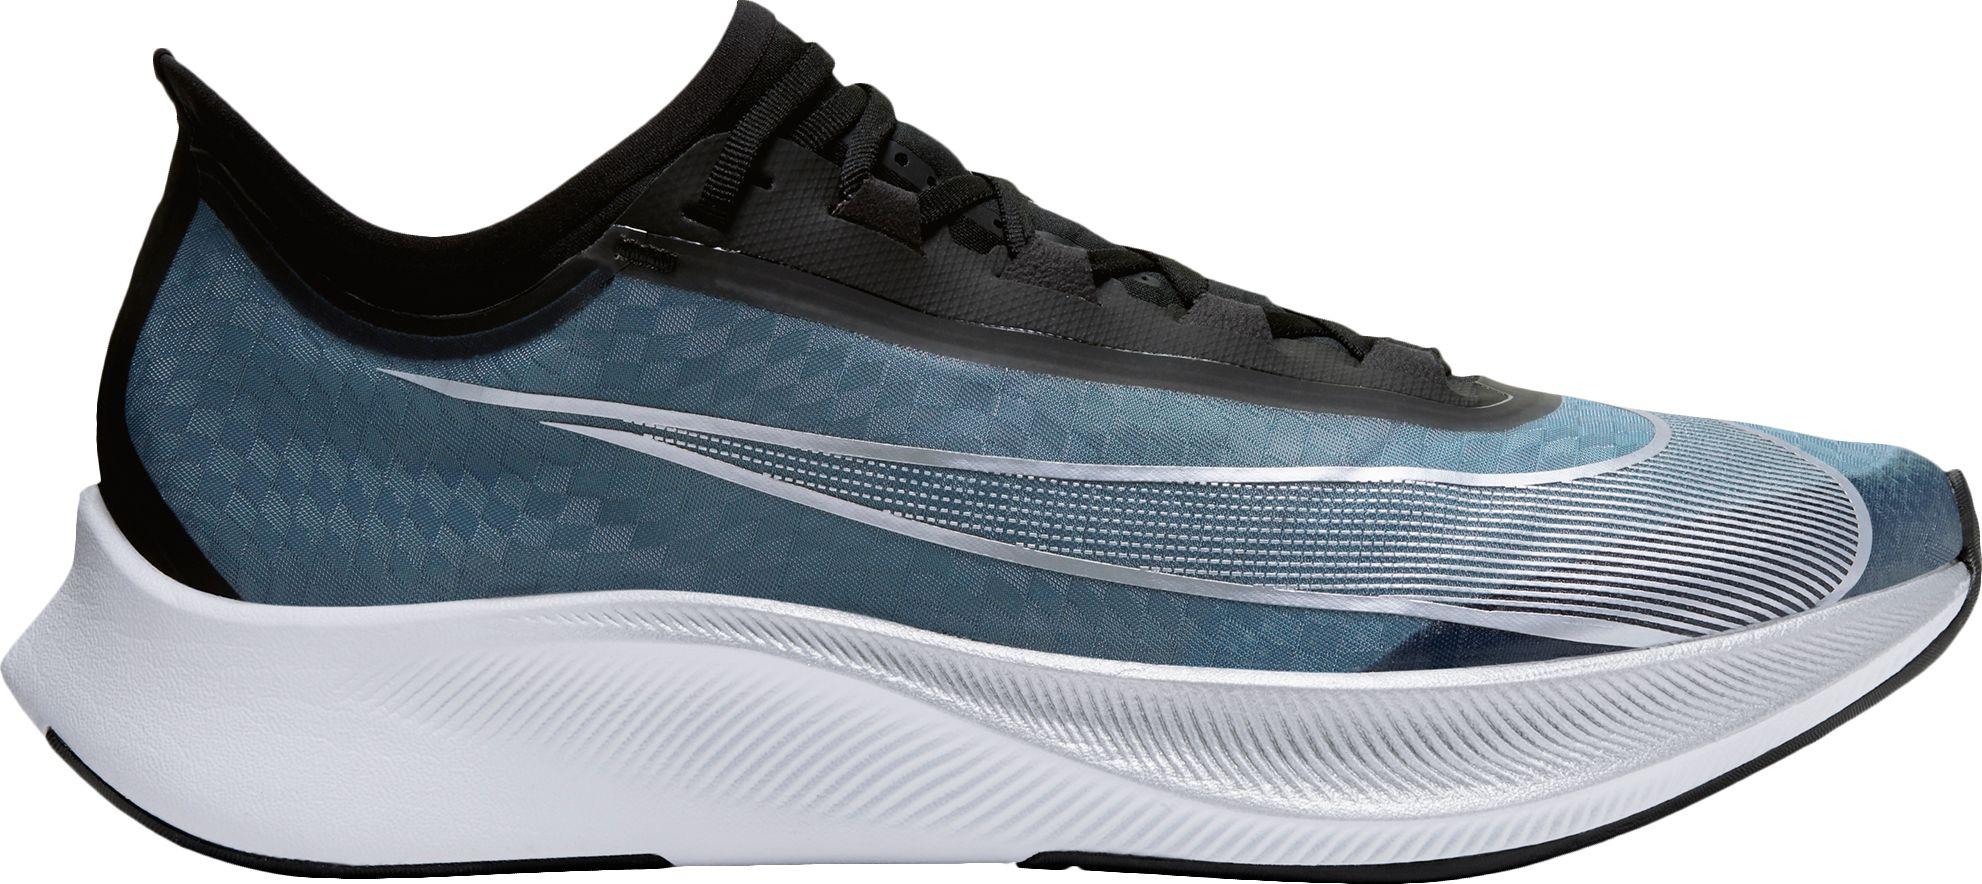 Nike Zoom Fly 3 Running Shoes in Blue/Silver (Blue) for Men - Lyst